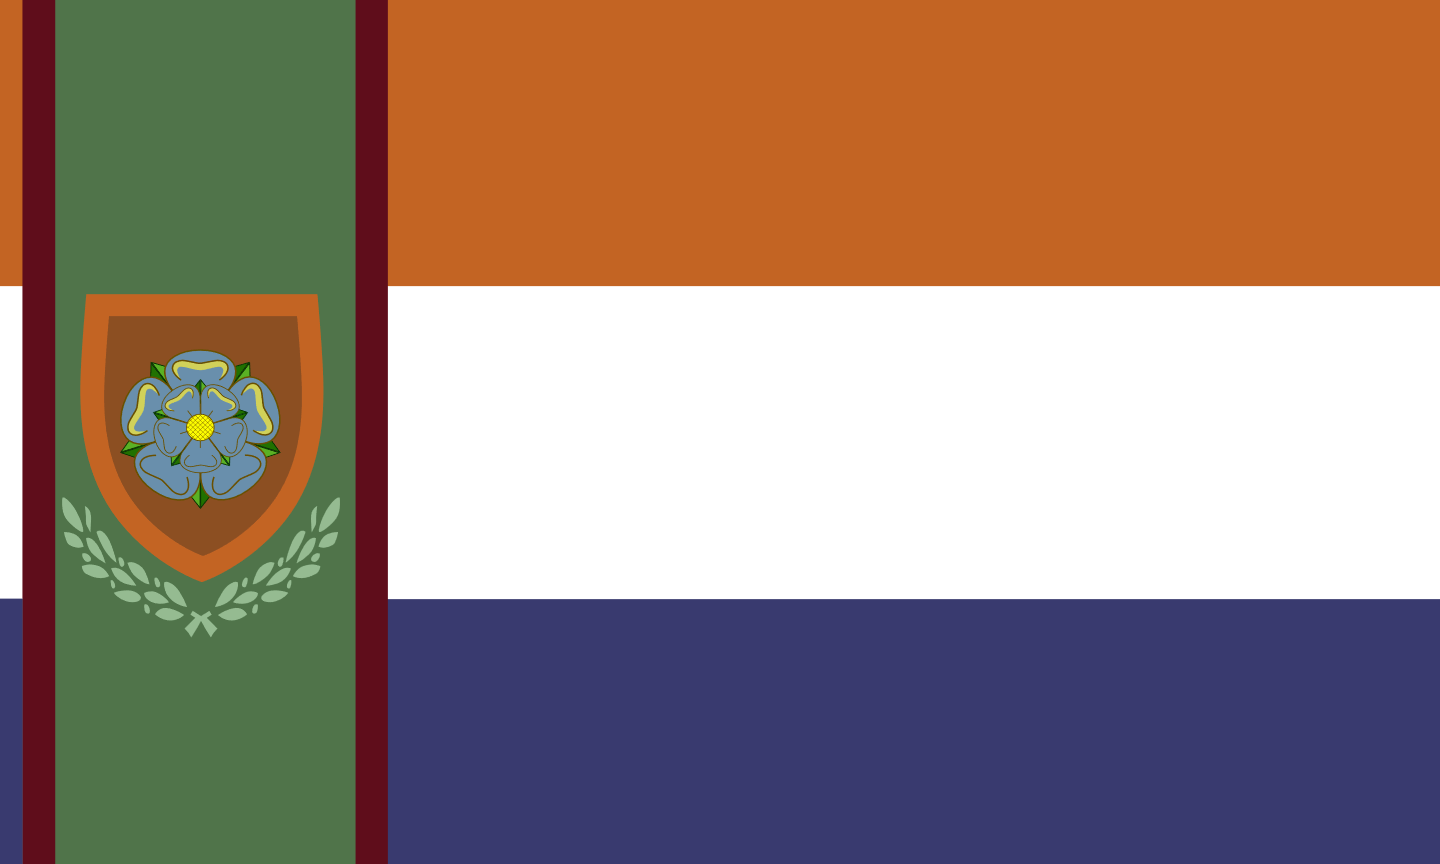 A flag with 3 horizontal stripes, the top one russet, the middle one white, and the bottom one a deep blue. A banner runs vertically from the left side of the image, green with a red border on either side and bearing a